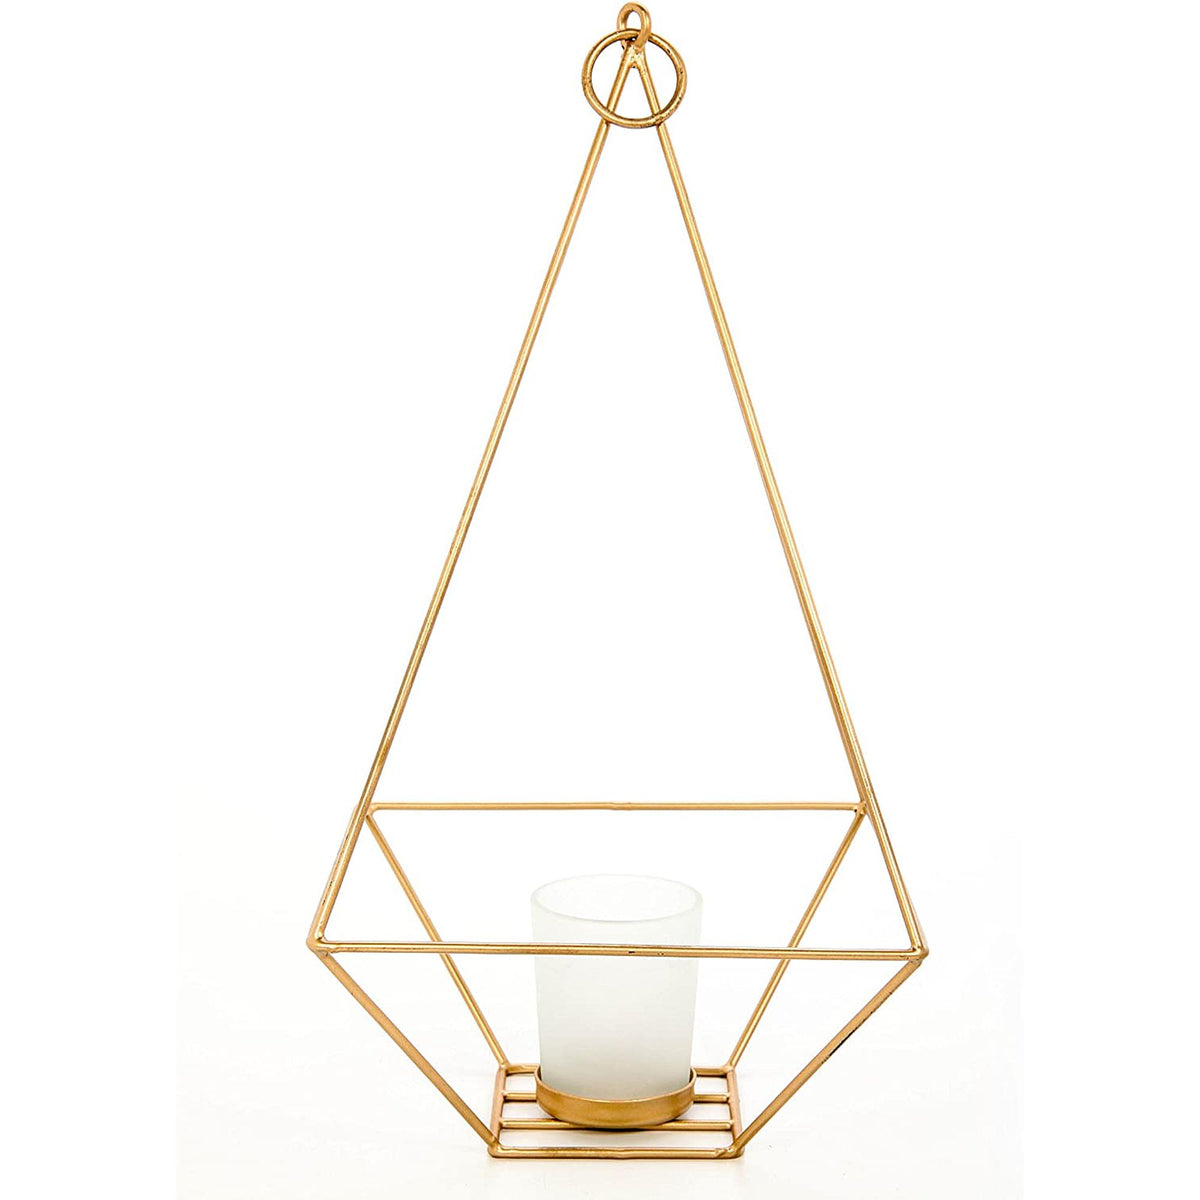 HOSLEY®  Iron Hanging Lantern with Frosted Glass Candle Holder, Gold Finish,  Set of 2, 11.5 inches High each